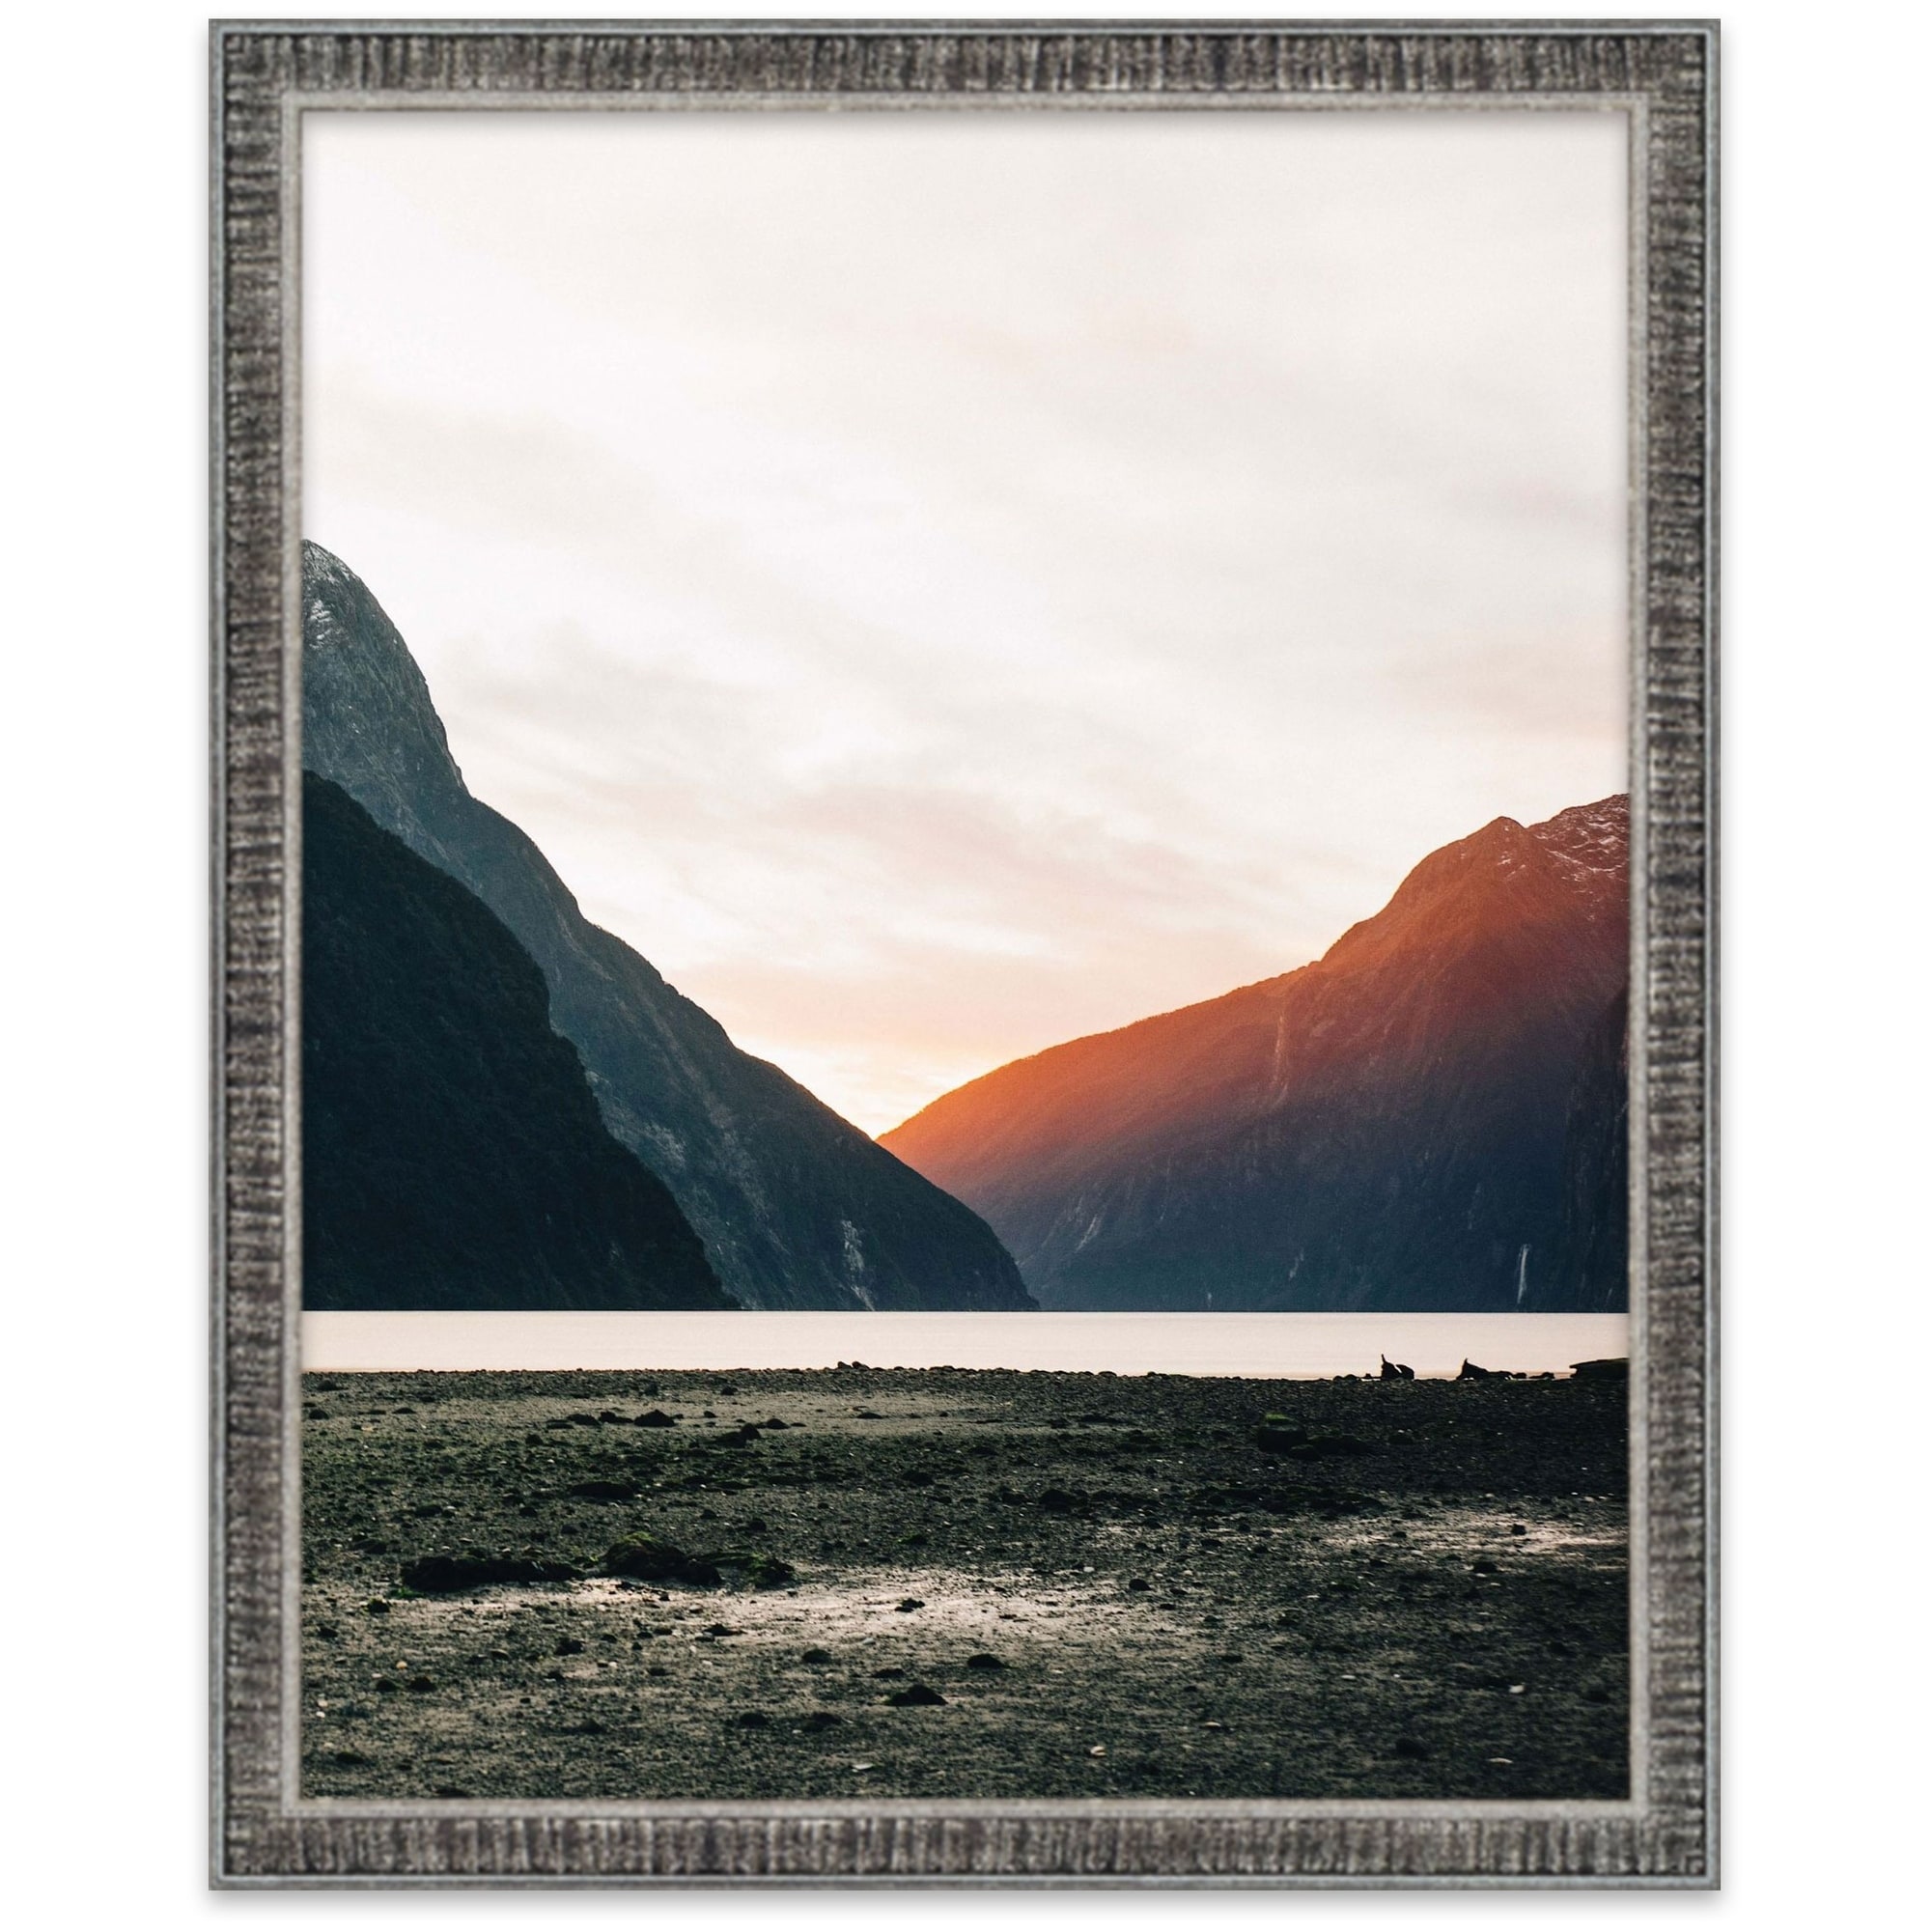 24x30 Frame Silver Picture Frame - Complete Modern Photo Frame - Bed Bath &  Beyond - 28340501